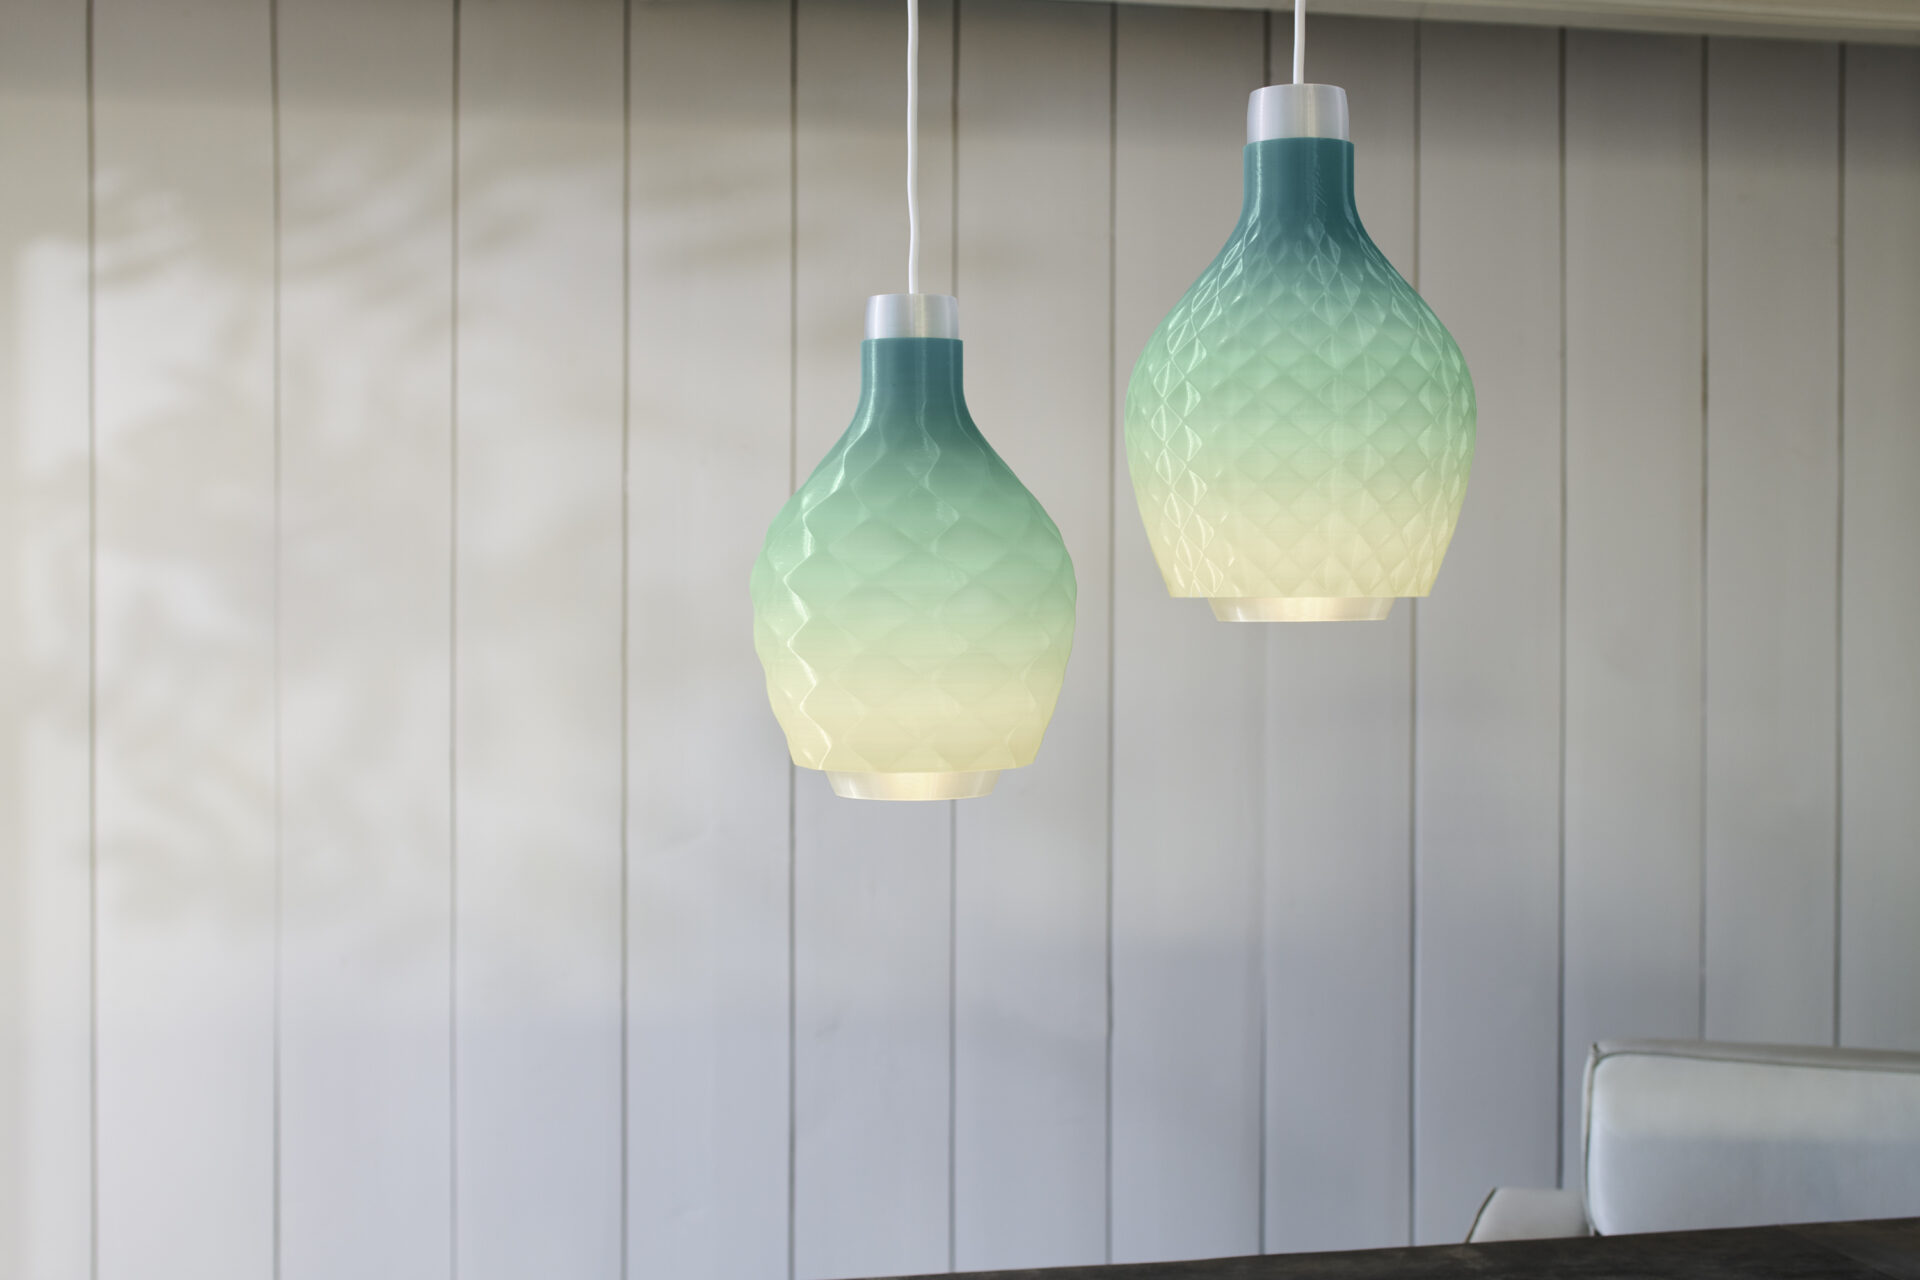 3D printed lamp made from 100� fishnet